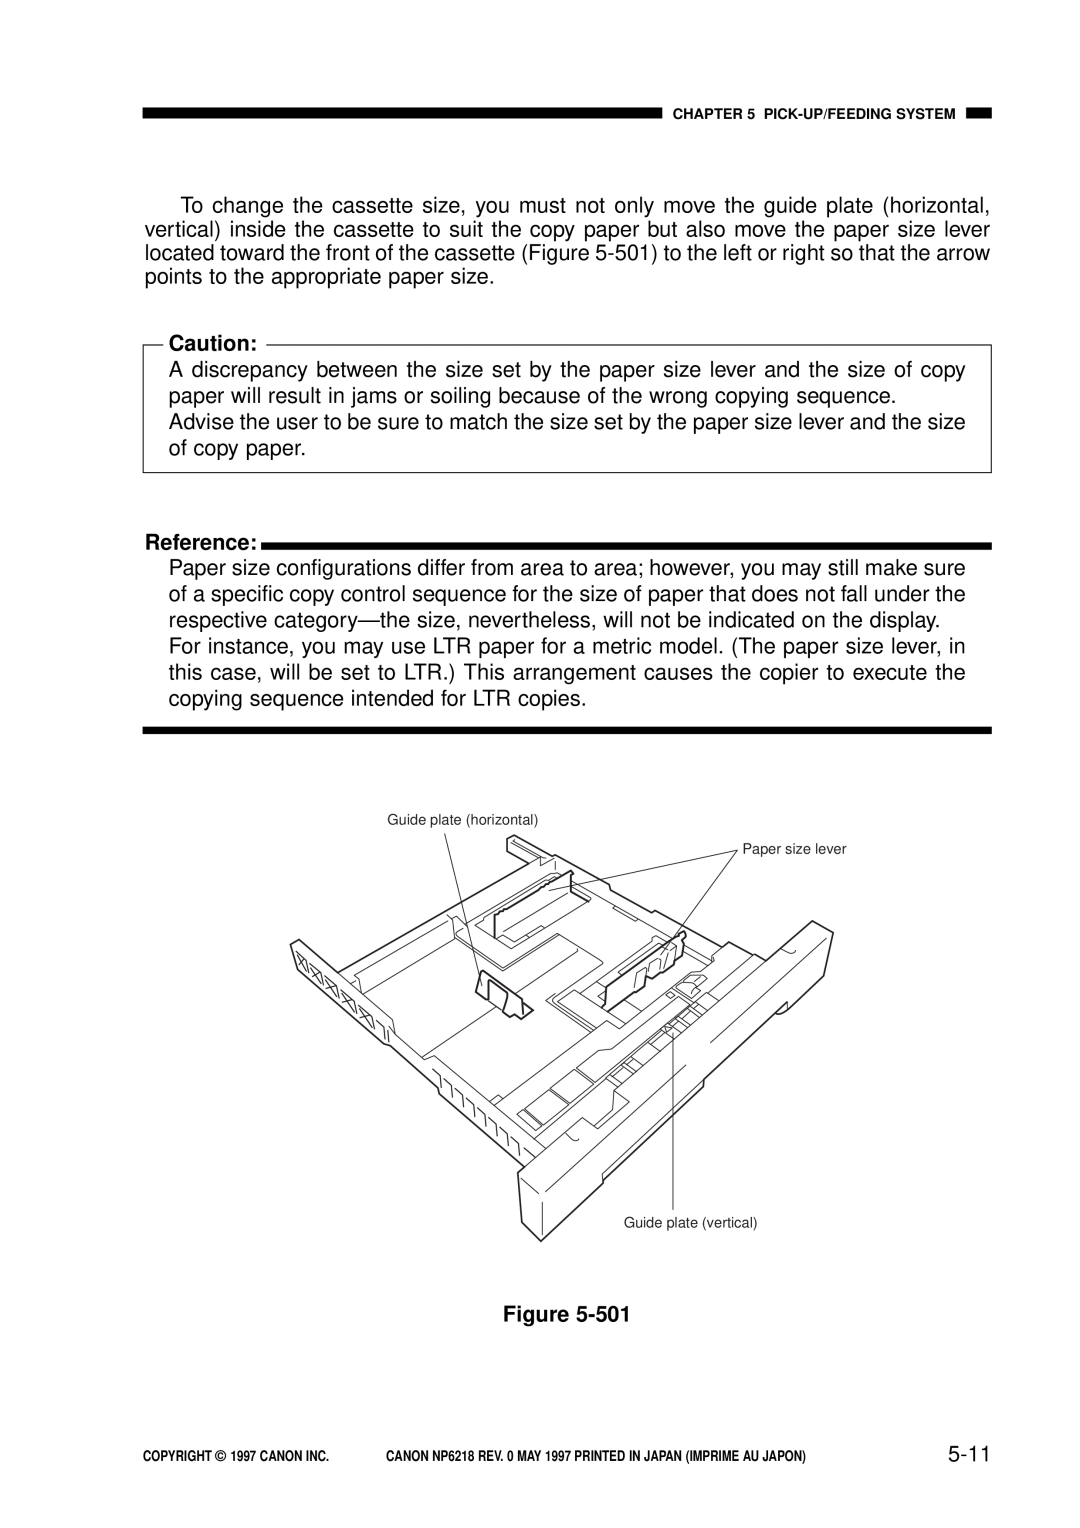 Canon NP6218, FY8-13EX-000 service manual 5-11, Reference, Guide plate horizontal Paper size lever Guide plate vertical 